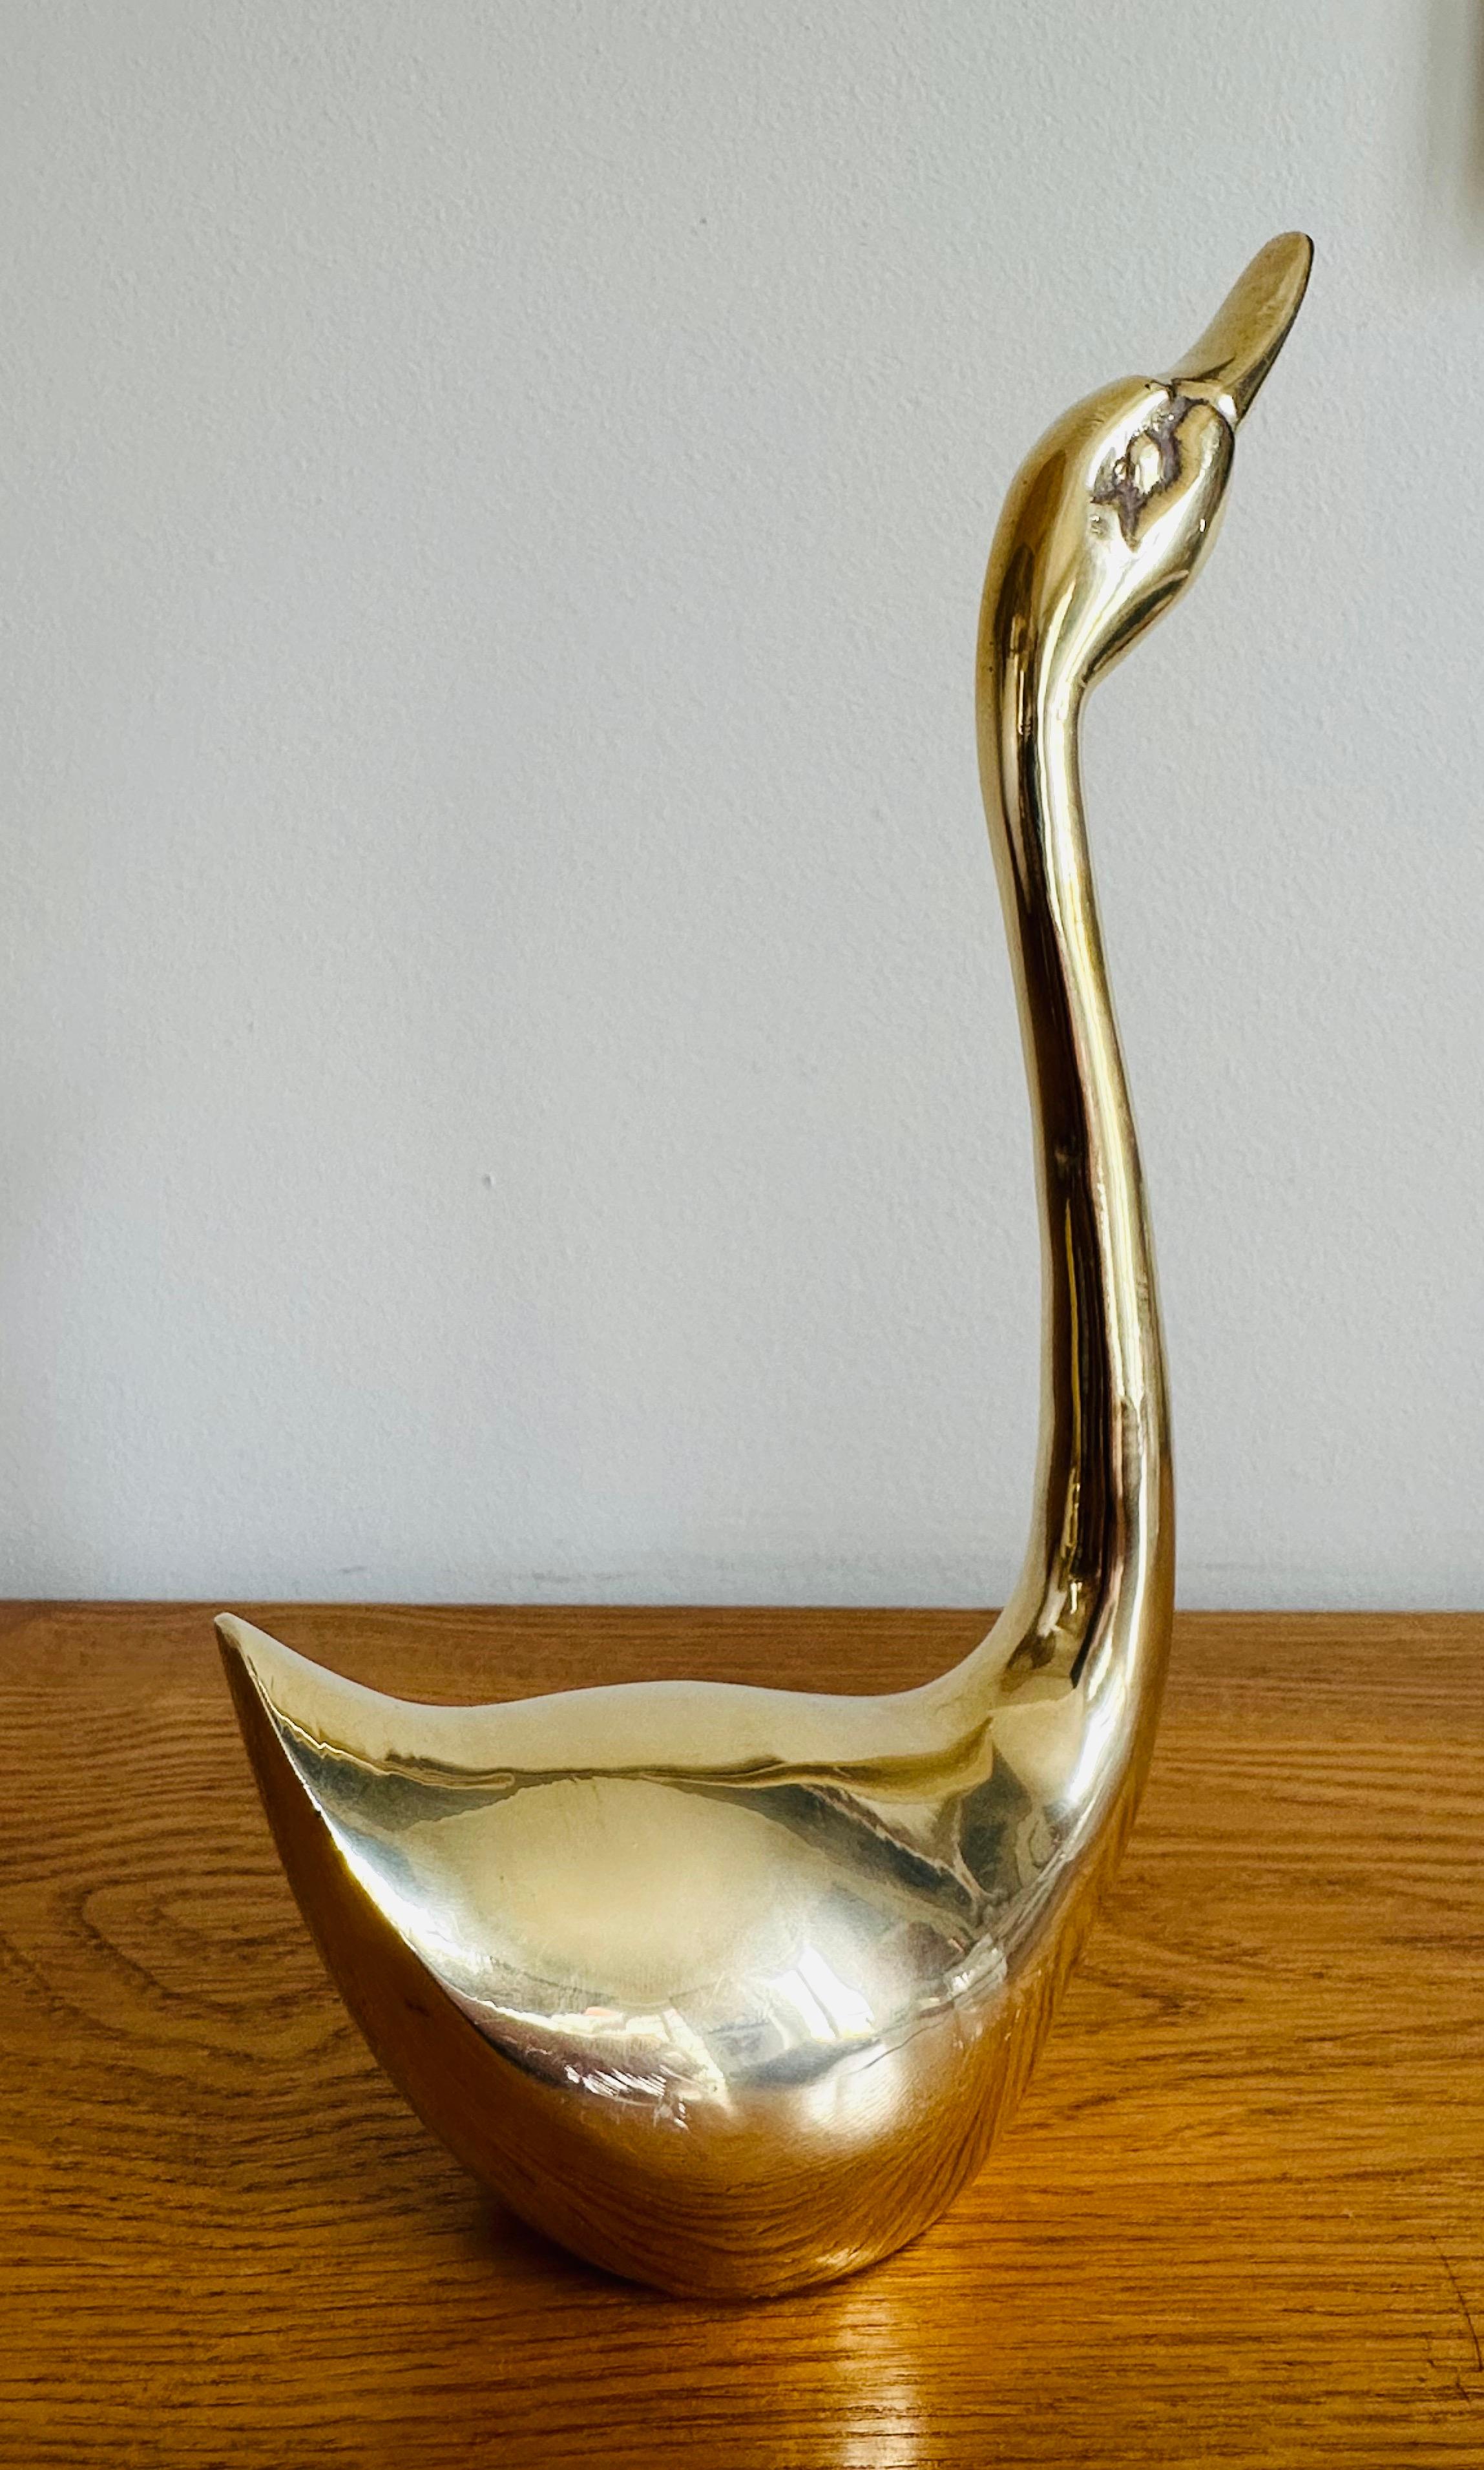 Vintage 1970s French Polished Brass Elegant Decorative Swan Paperweight 2